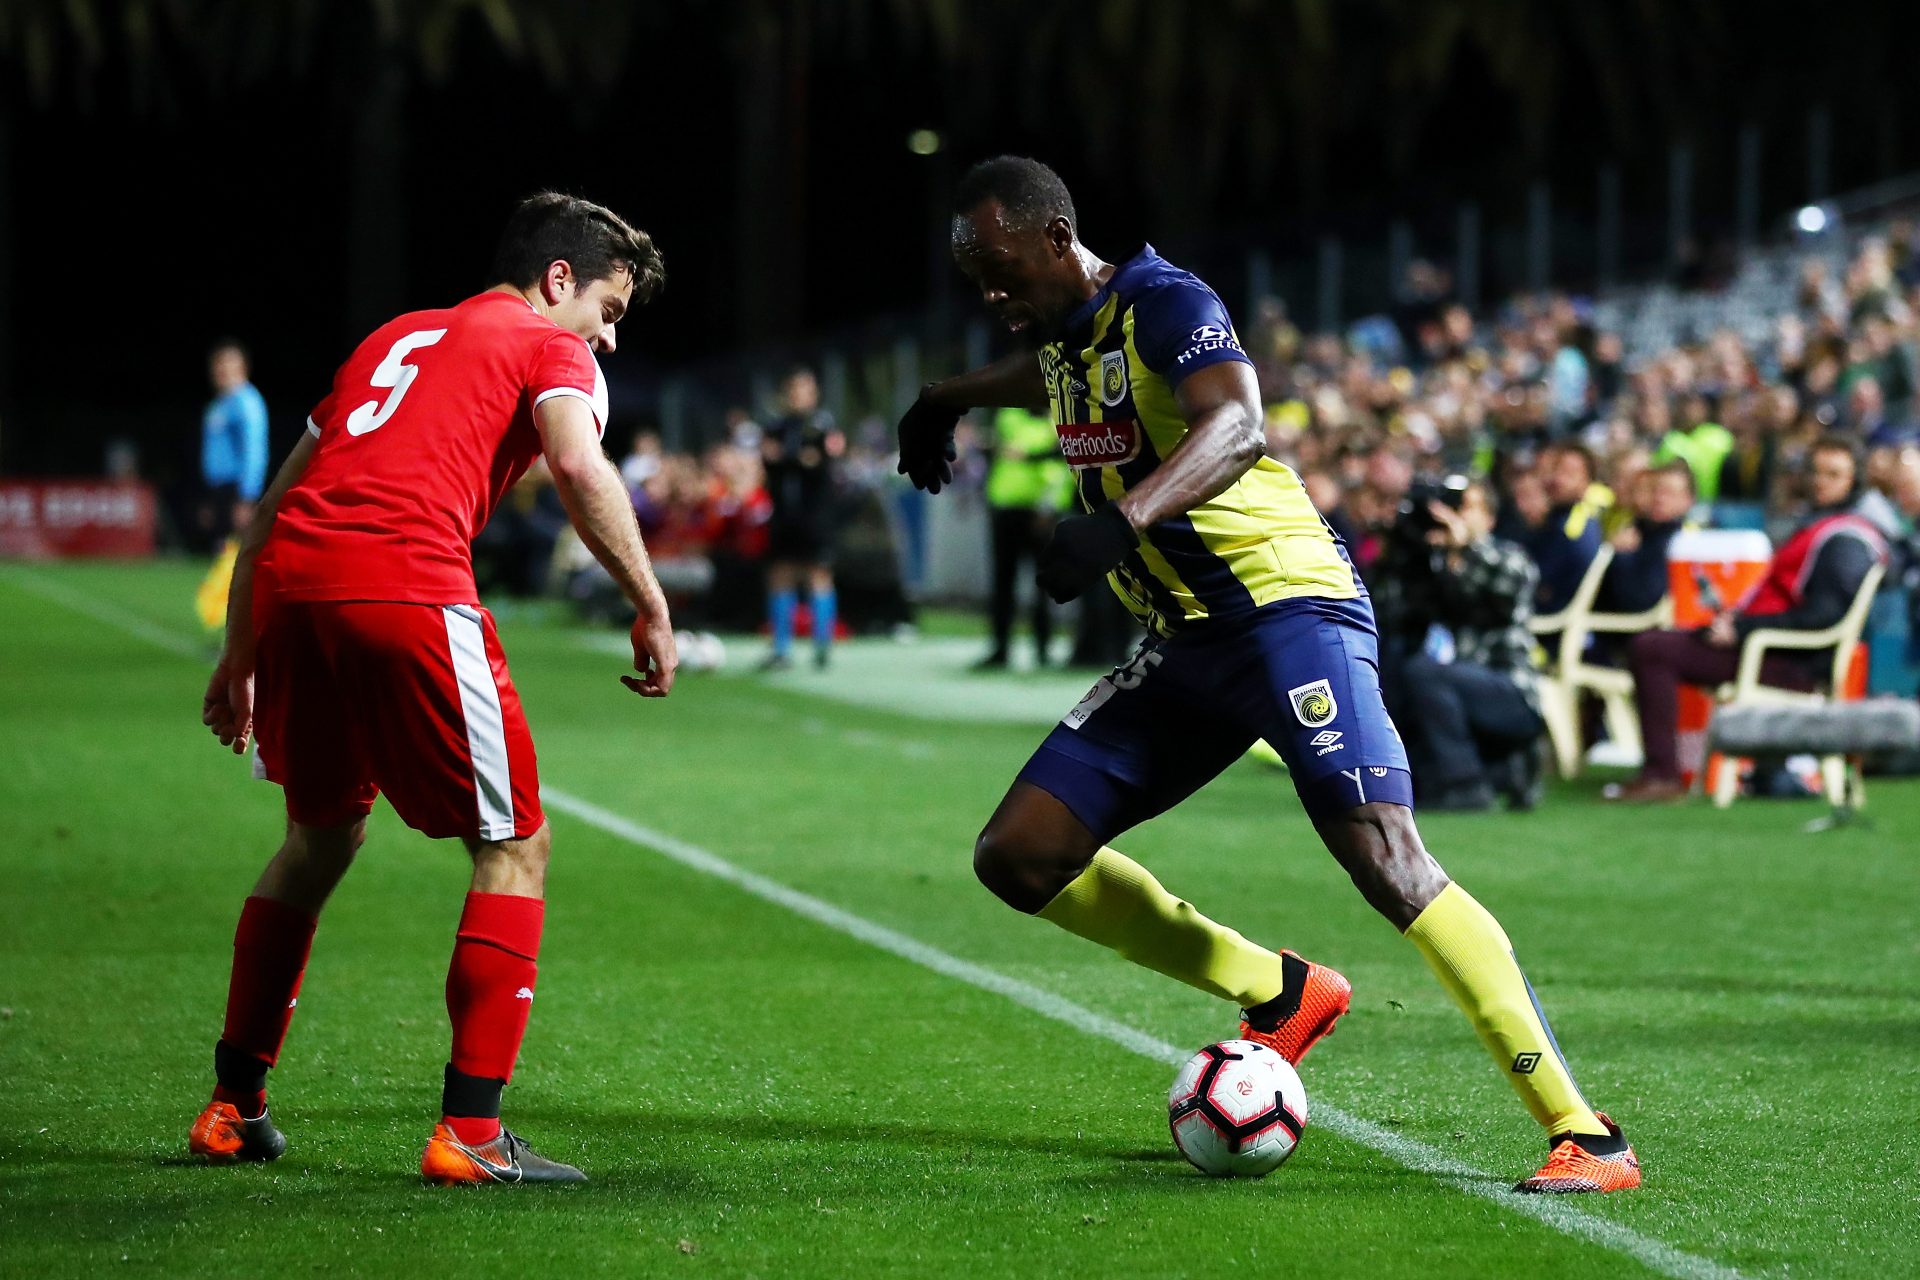 Usain Bolt Wants to Play Professional Football